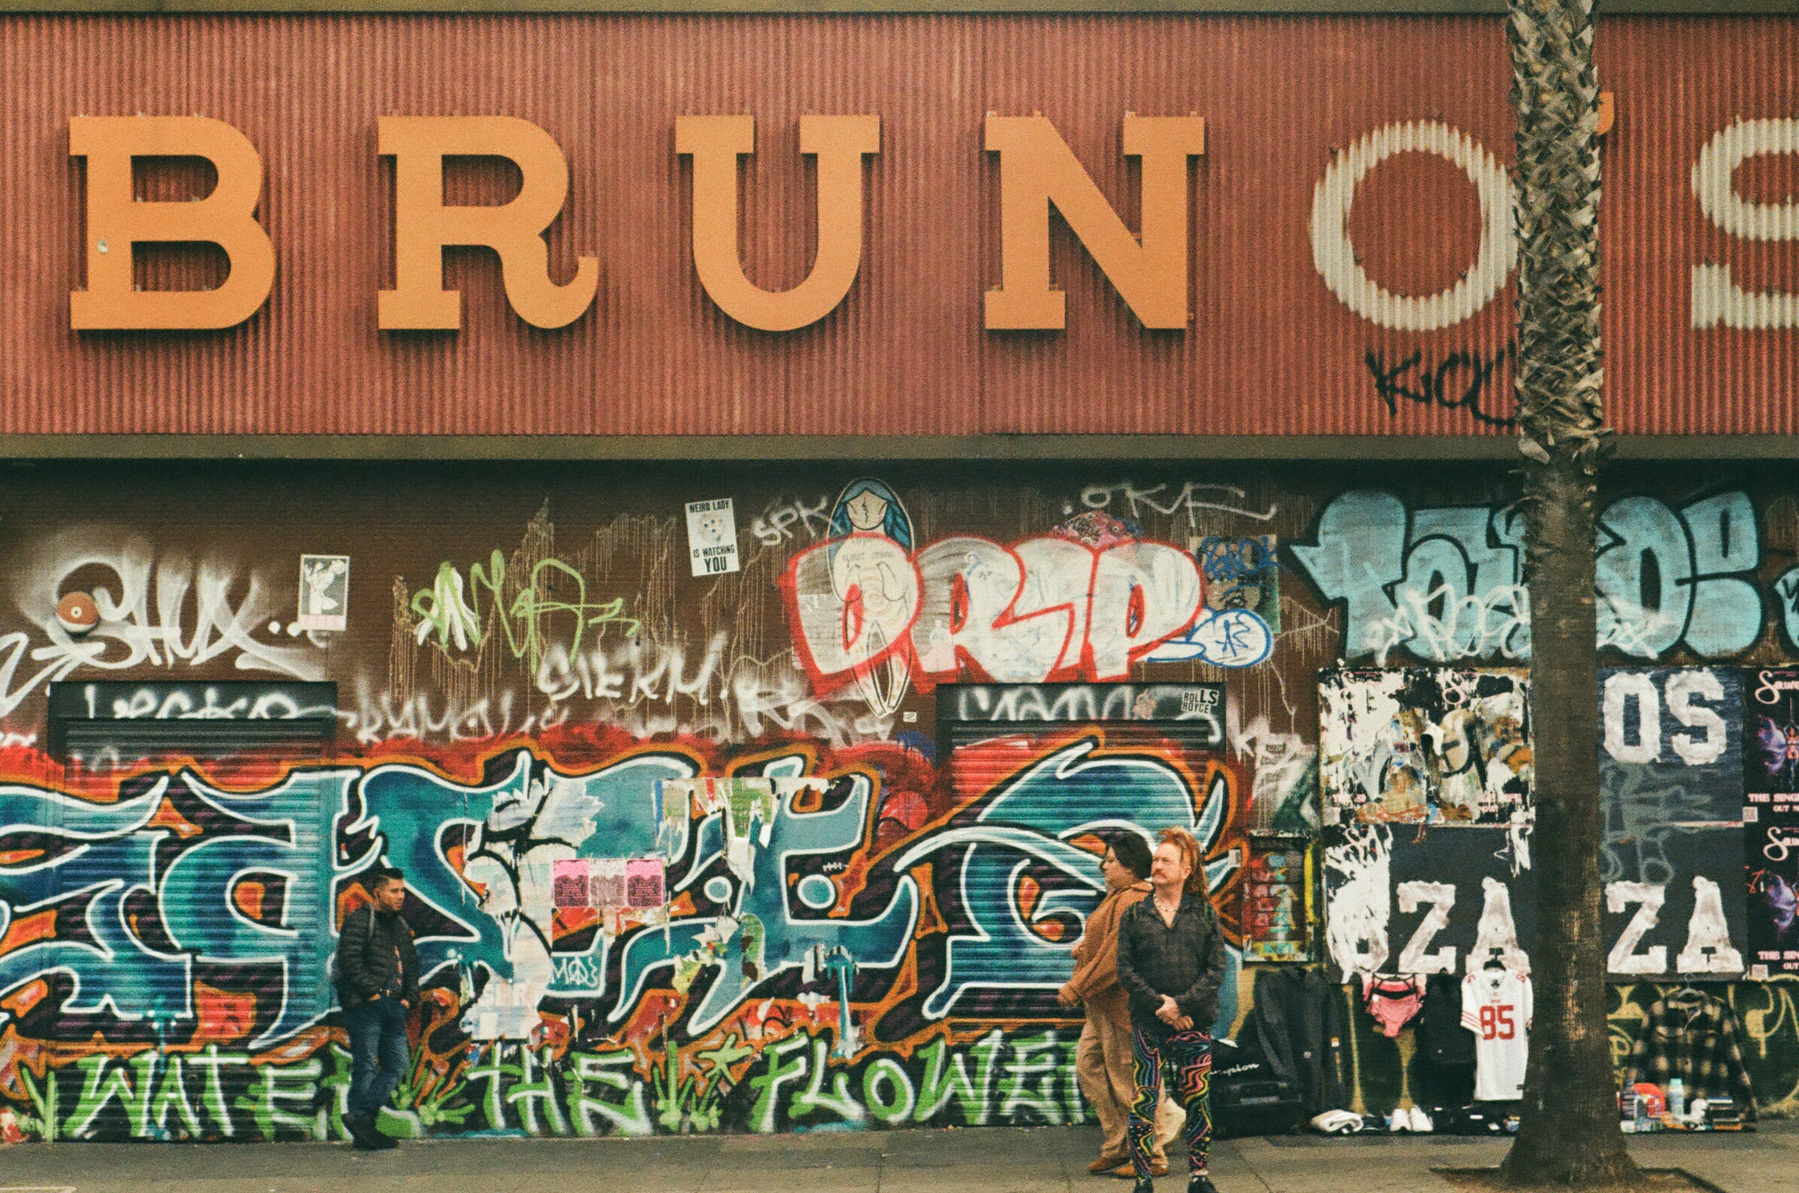 A color photograph of a street scene in the Mission district, San Francisco, with a large sign that says Bruno's and a few people standing in front of a heavily graffitied wall